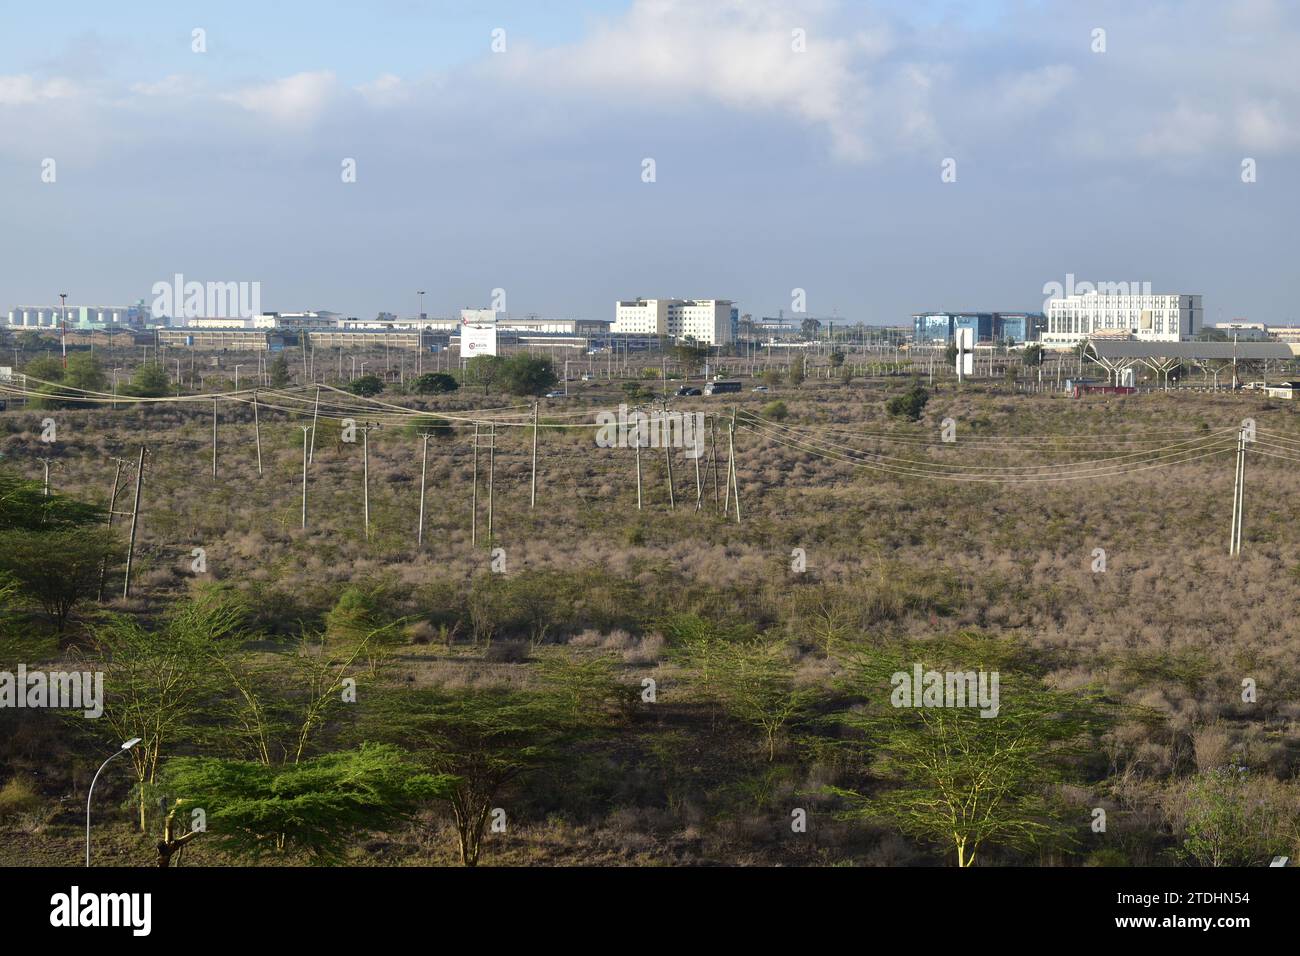 A dry grass field with several wooden power lines near Nairobi International Airport as seen from the rooftop of Crowne Plaza Nairobi Airport hotel Stock Photo